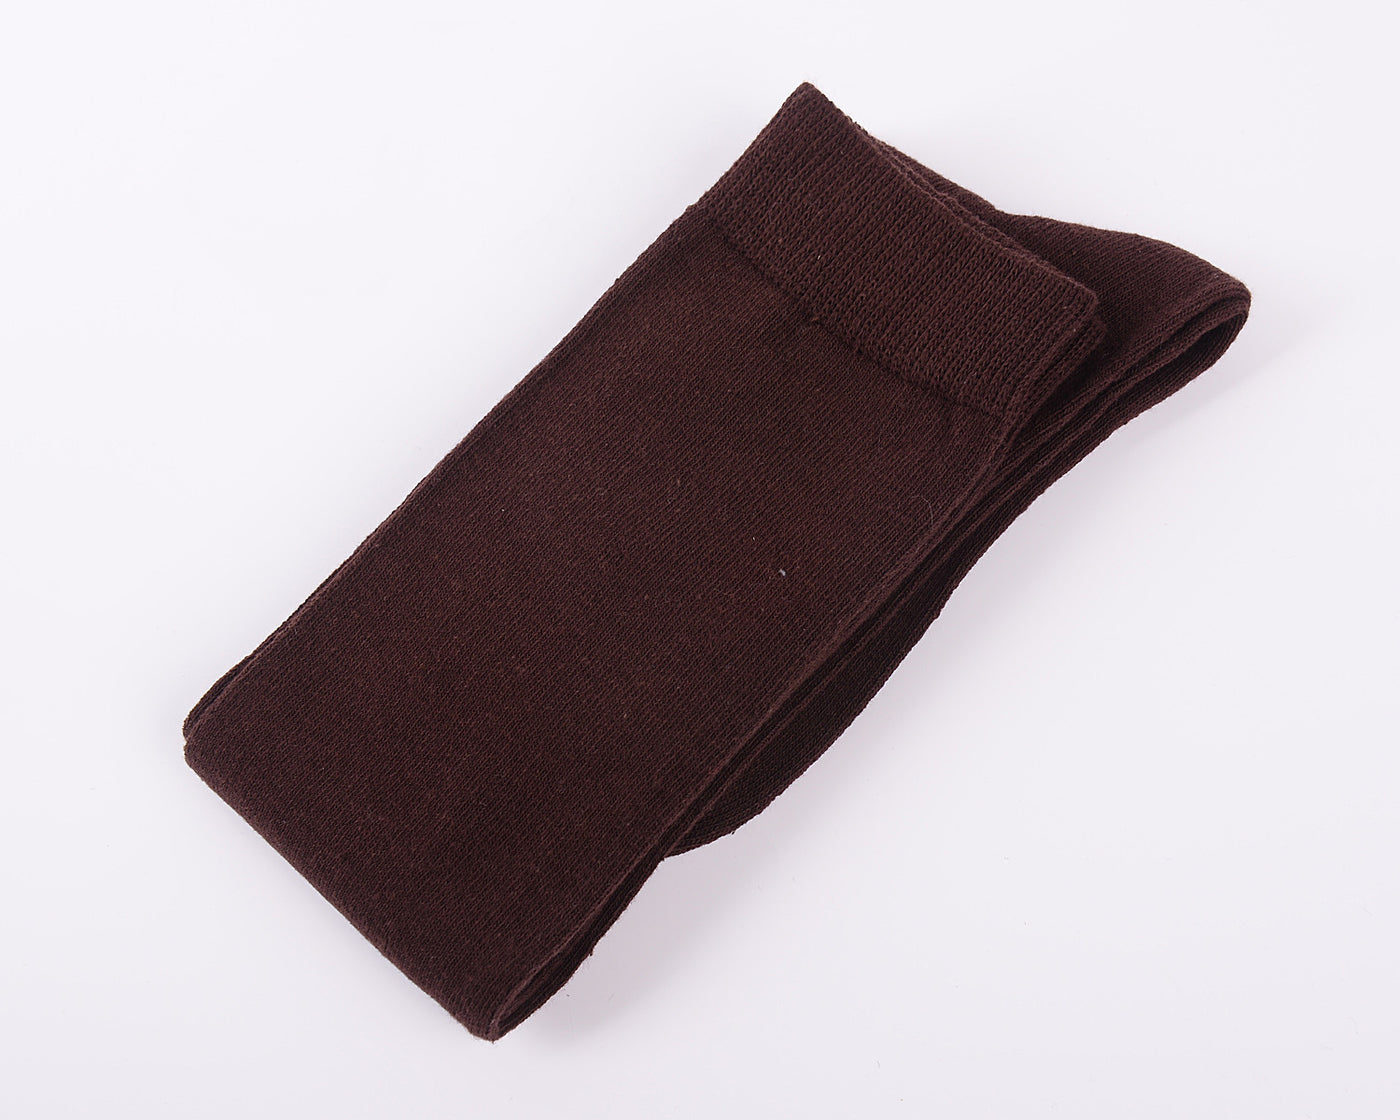 Laulax High Quality Finest Combed Cotton Over the Knee Socks- Coffee